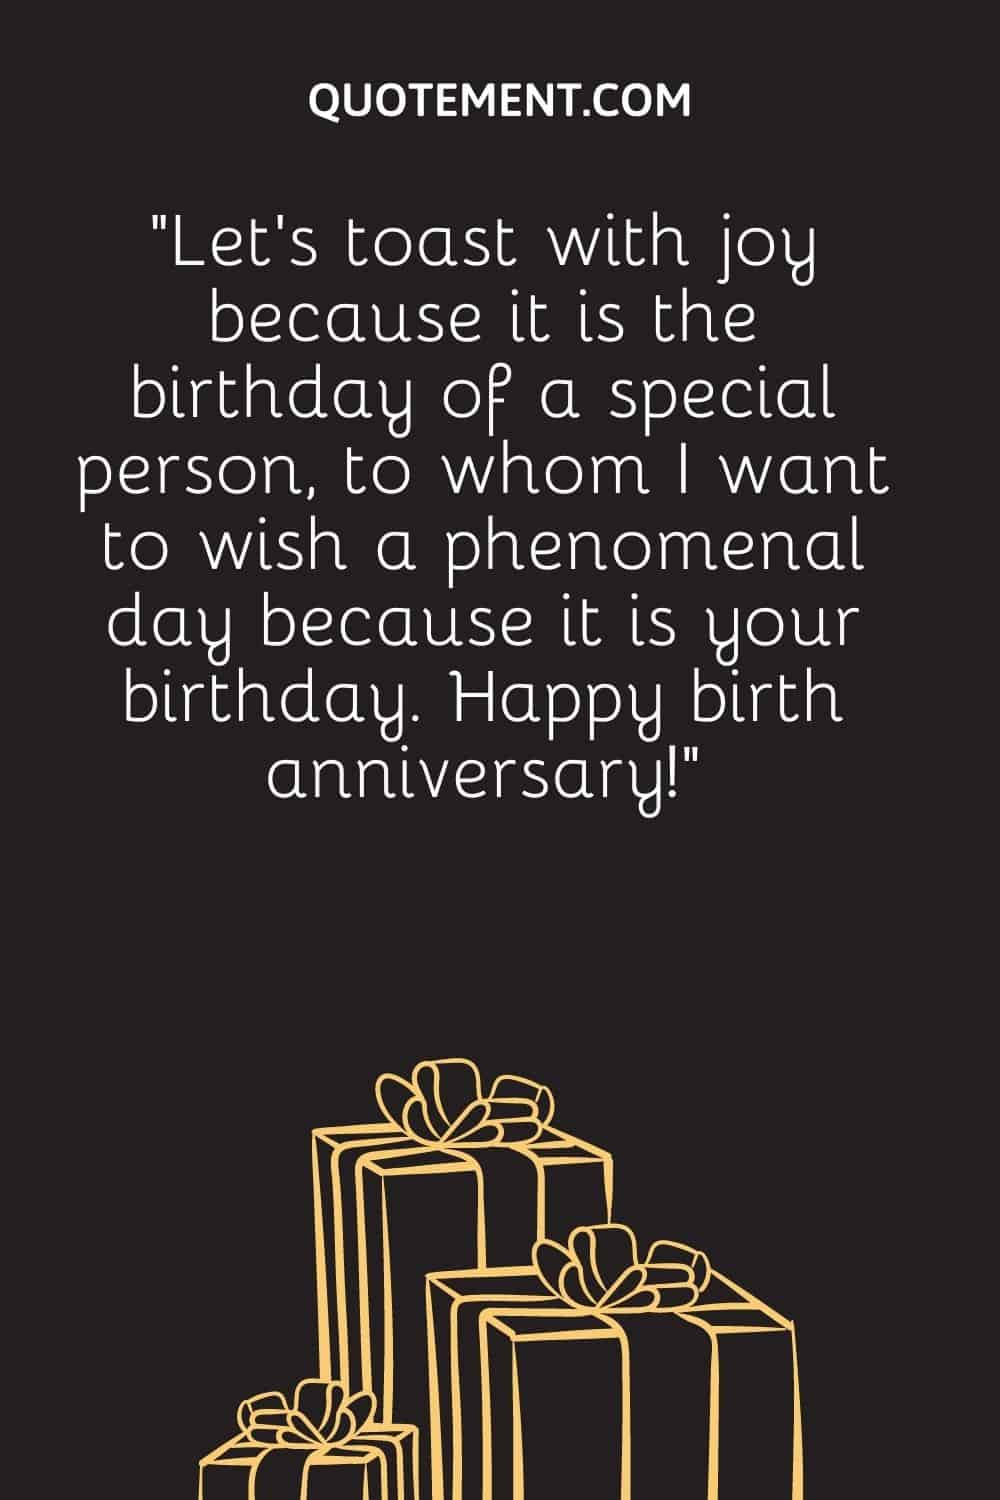 “Let’s toast with joy because it is the birthday of a special person, to whom I want to wish a phenomenal day because it is your birthday. Happy birth anniversary!”